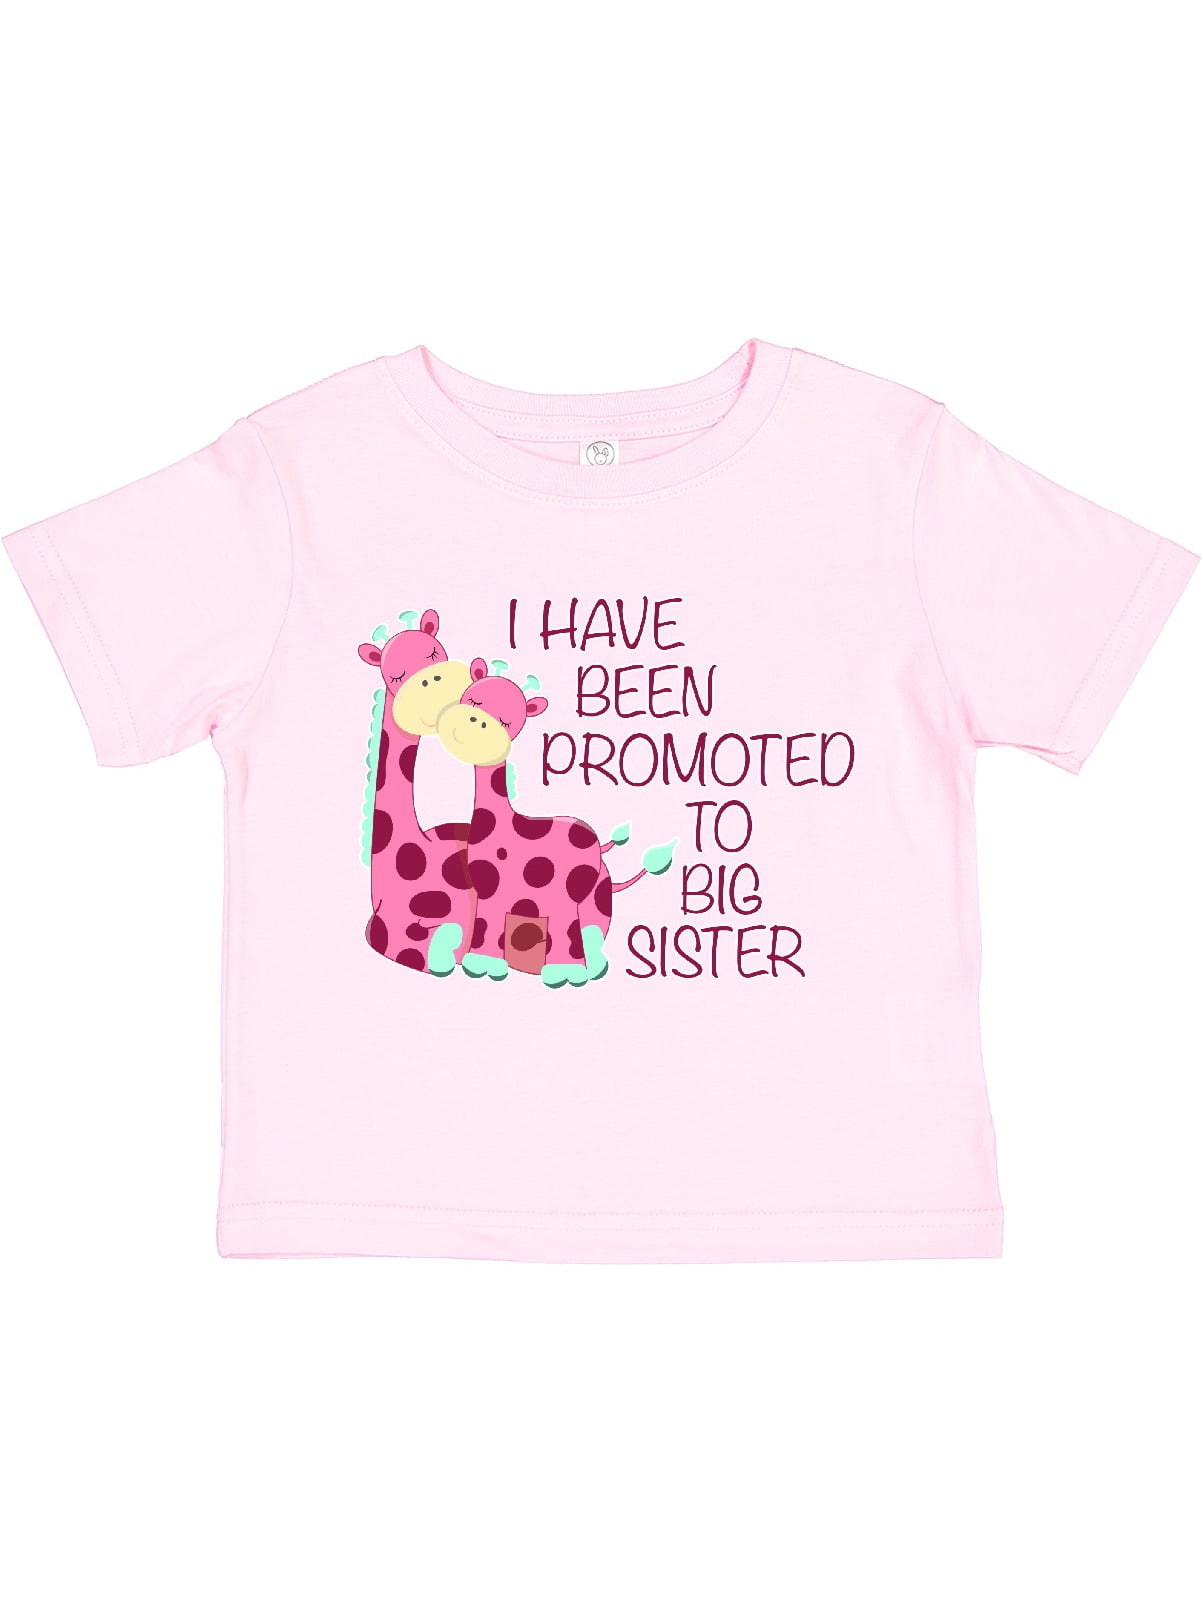 Toddler Girl T-Shirt B Is For Big Sister Tee Big Sis T-Shirt Pregnancy Announcement Shirt Big Sister Shirt Promoted To Big Sister Tee